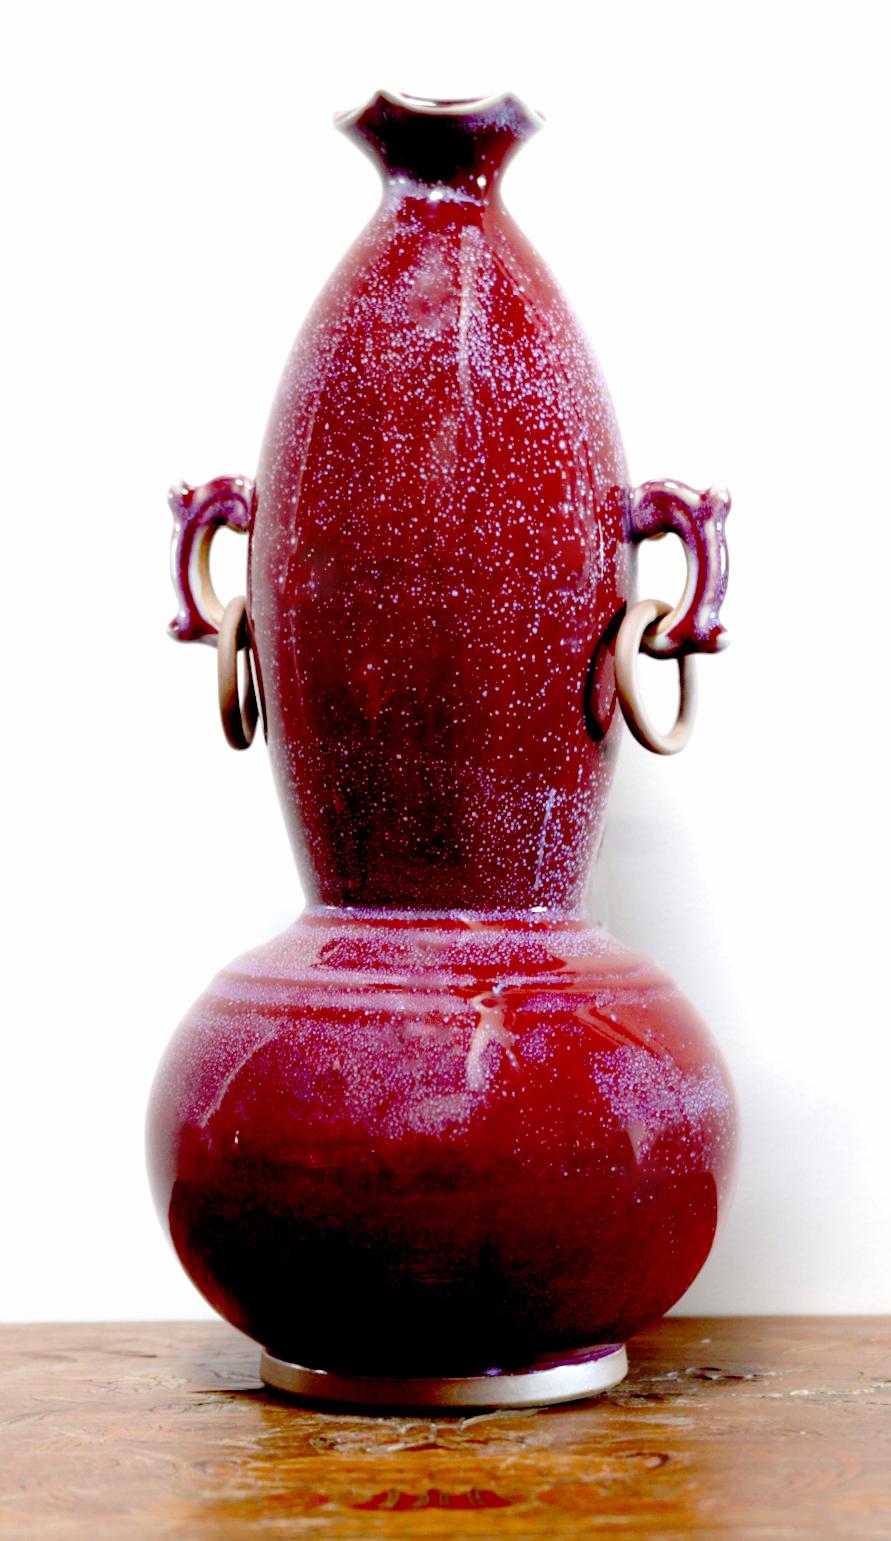 Ceramic 19th Century Rare Sang de Boeuf, Oxblood Gourd Vase with Ears, Copper Rings For Sale